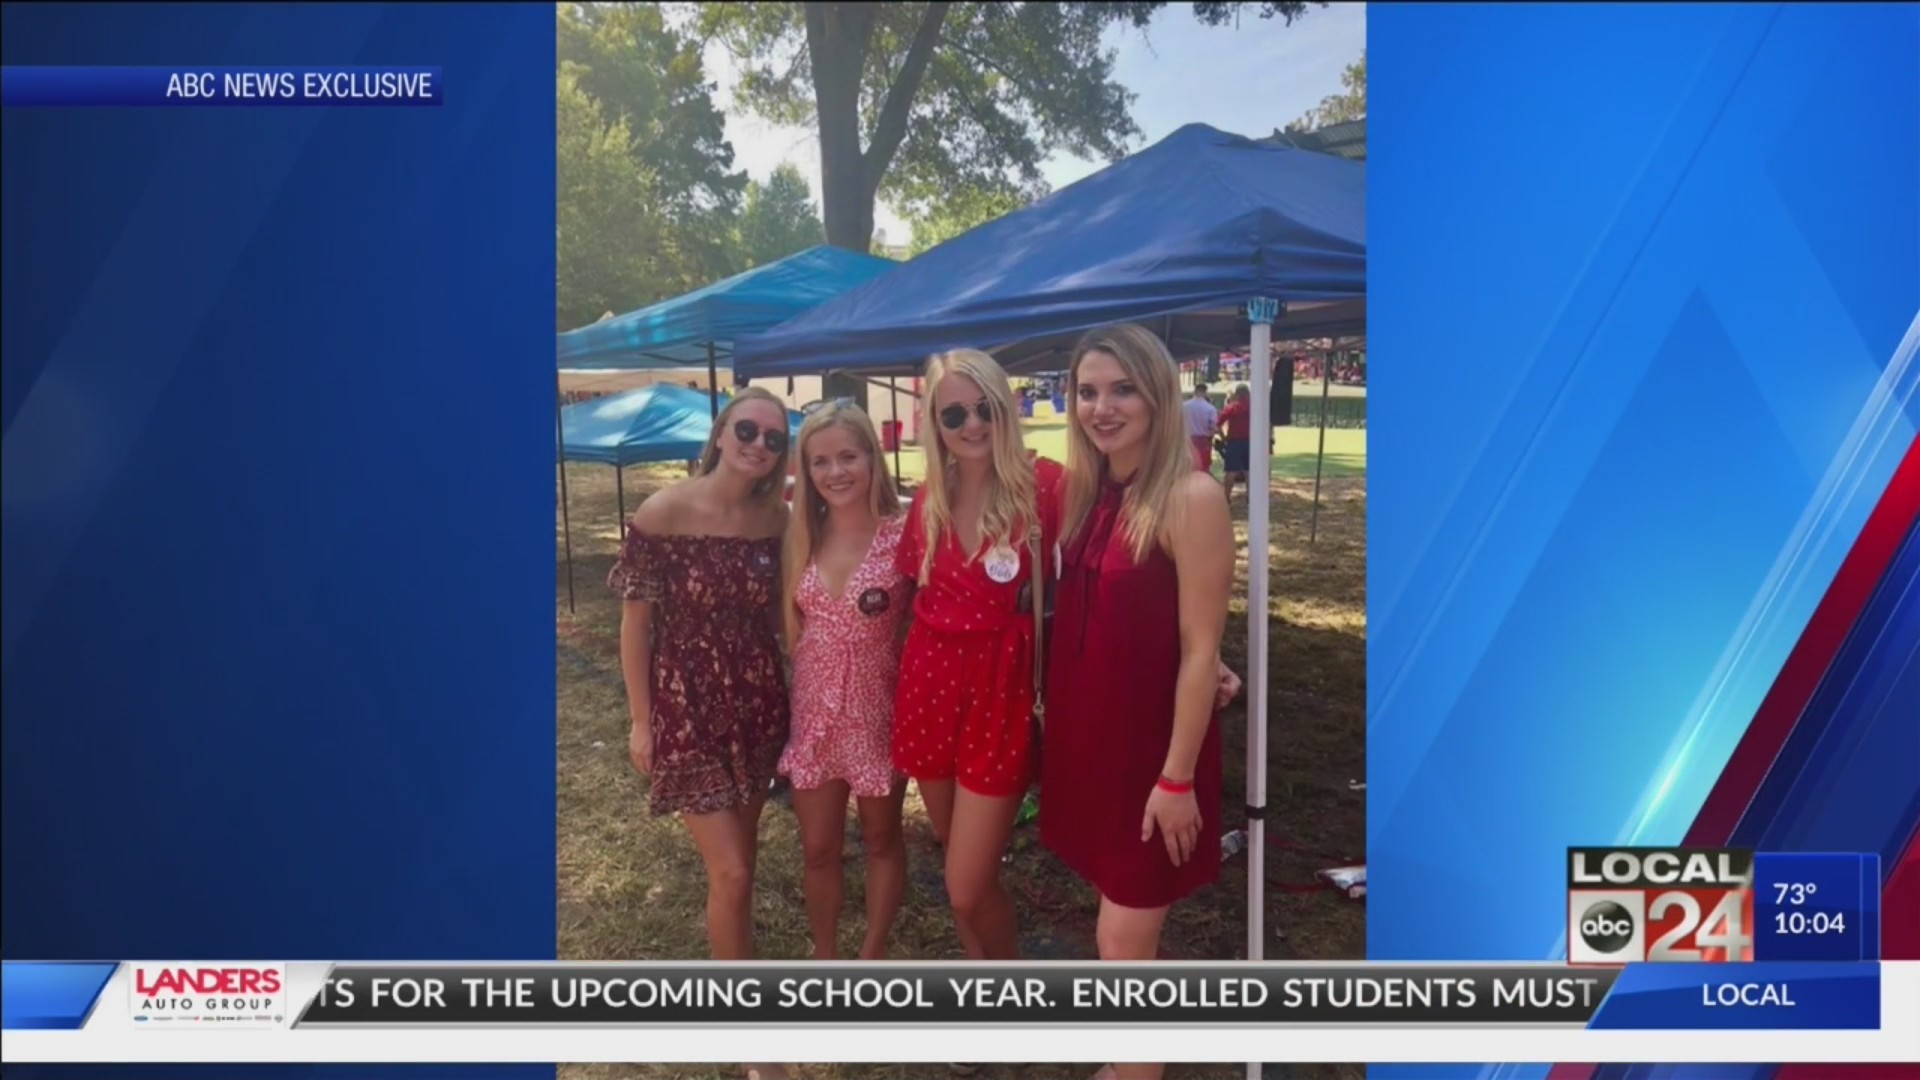 Friends of murdered Ole Miss student Ally Kostial talk about what she meant to them